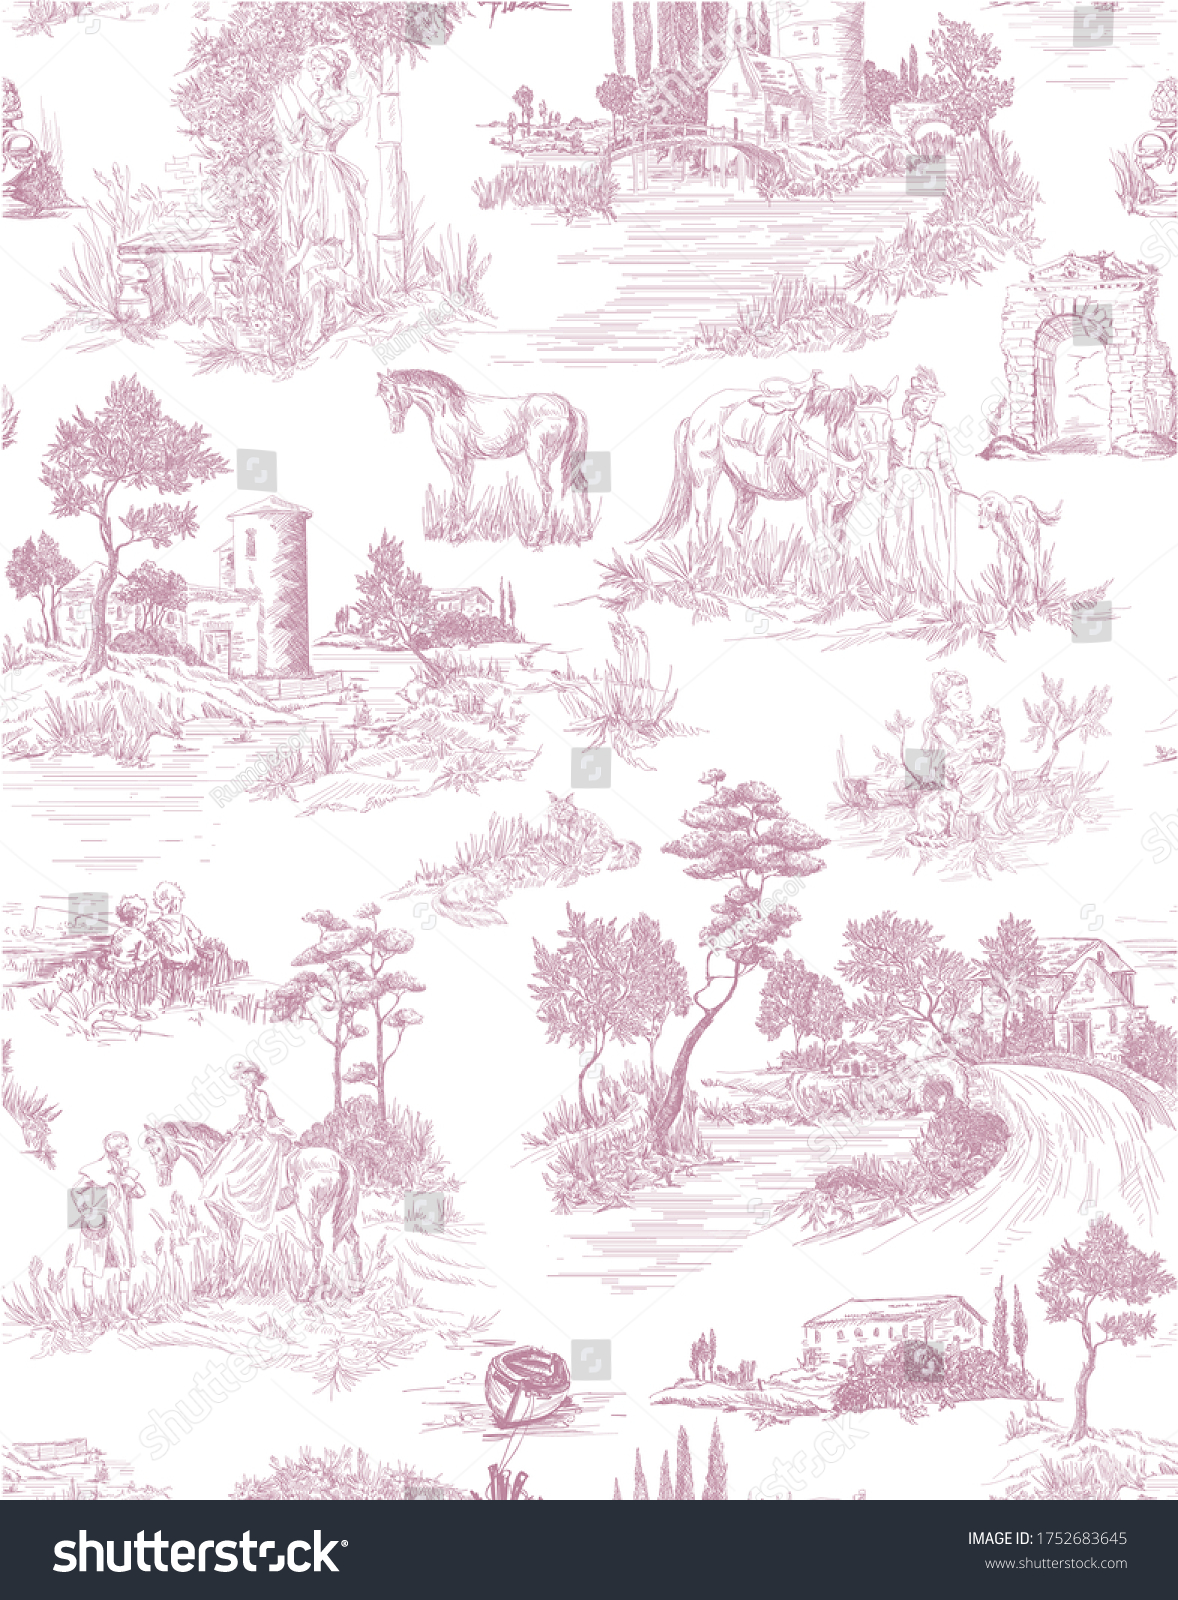 SVG of Toile de jouy pattern with countryside views with castles and houses and landscapes and walking people with animals-pets-horses, cats, dog in pink color svg